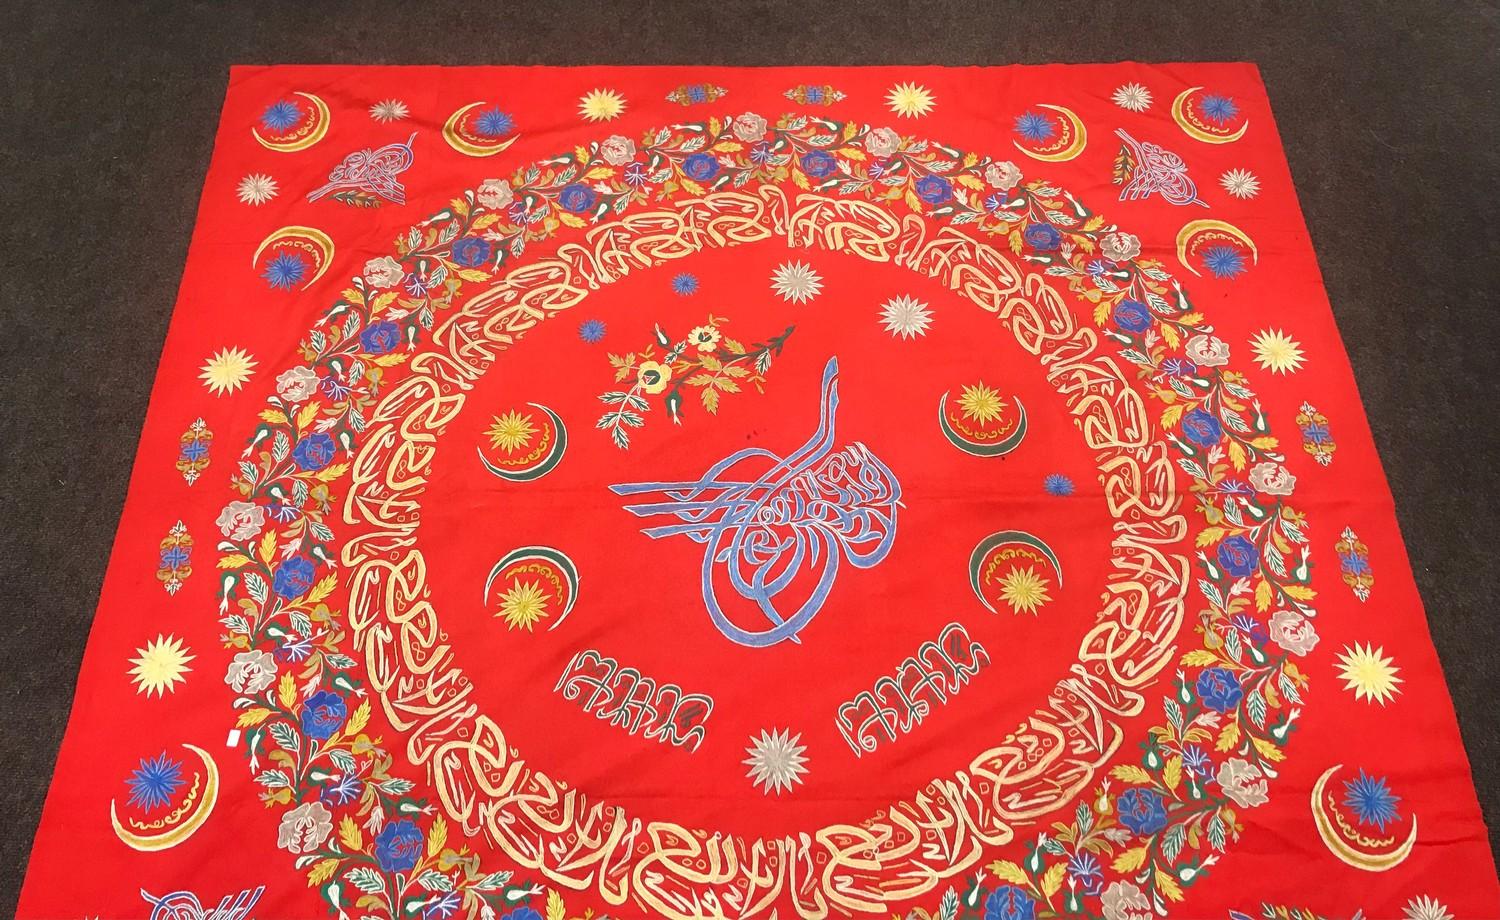 Large ottoman Turkish embroidered red textile - Image 2 of 2